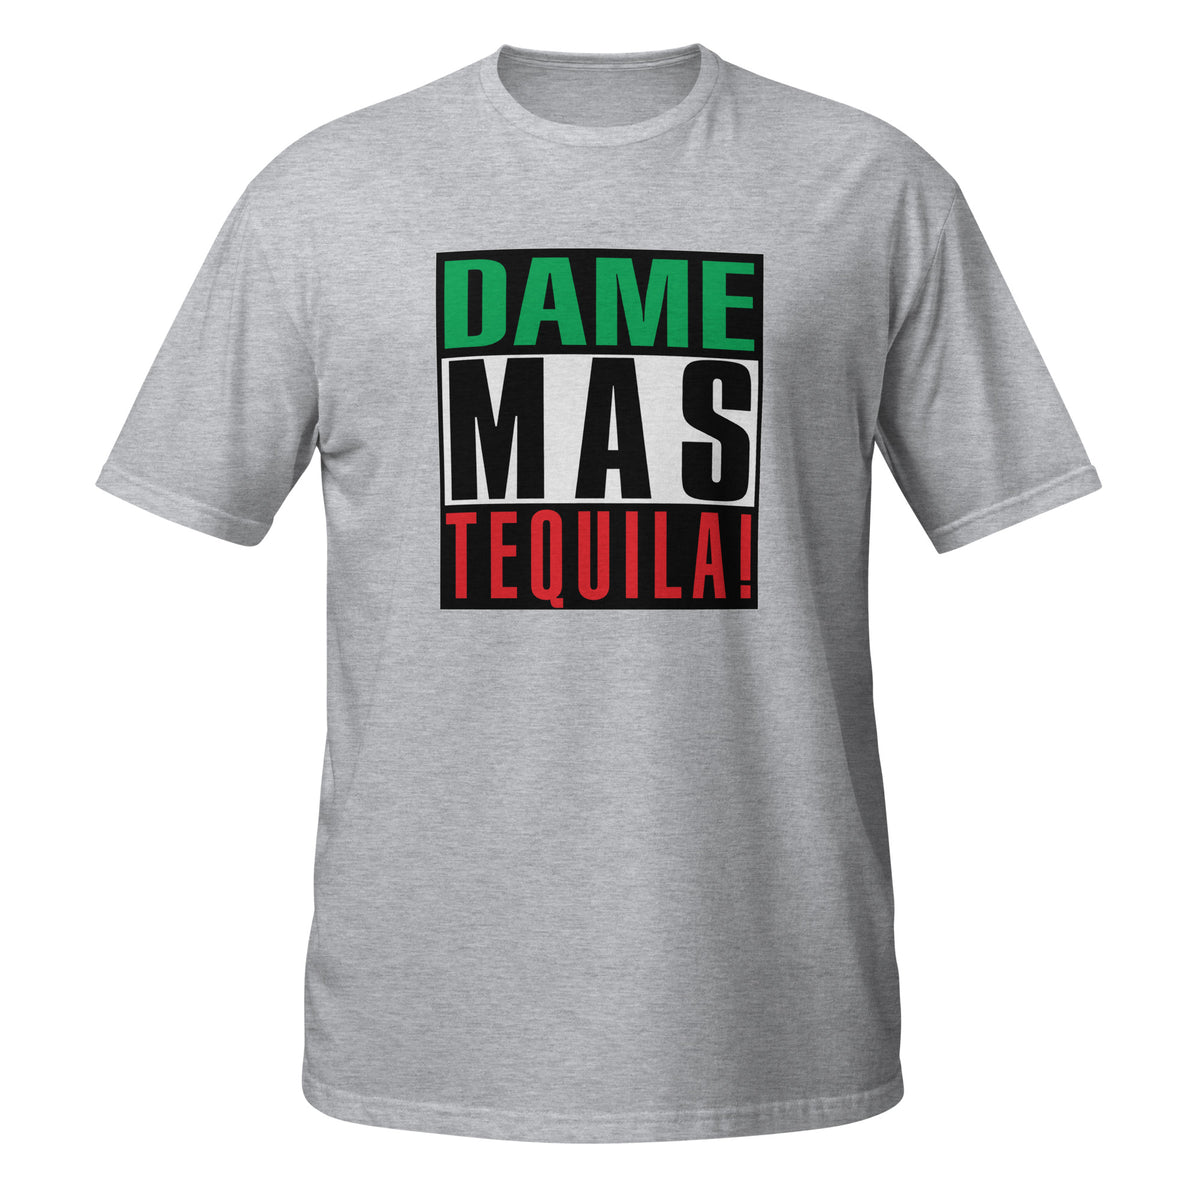 Dame Más Tequila T-Shirt (Give me more tequila)